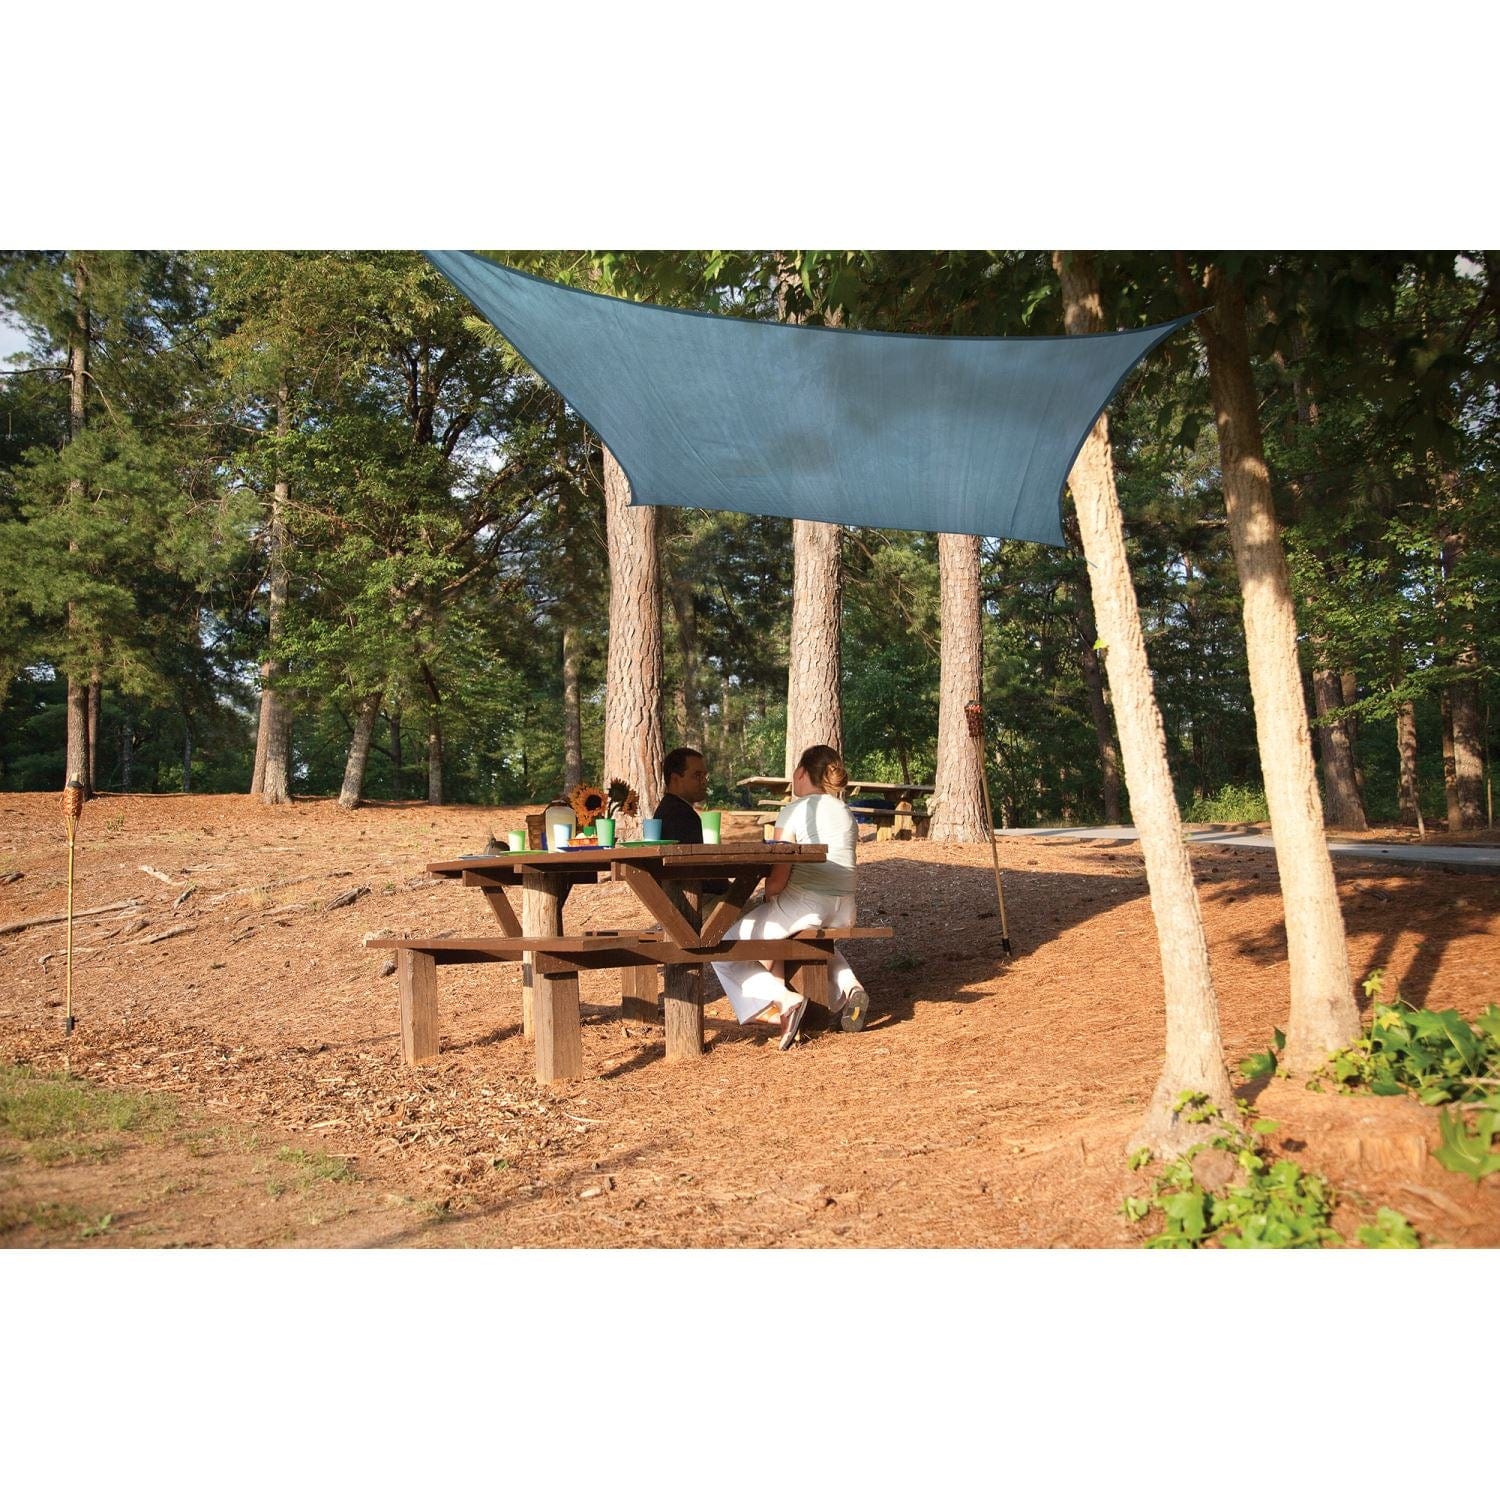 ShelterLogic Sun Shade Products ShelterLogic | Shade Sail Square - Heavyweight 16 x 16 ft. Sea Blue (Attachment point/pole not included) 25736